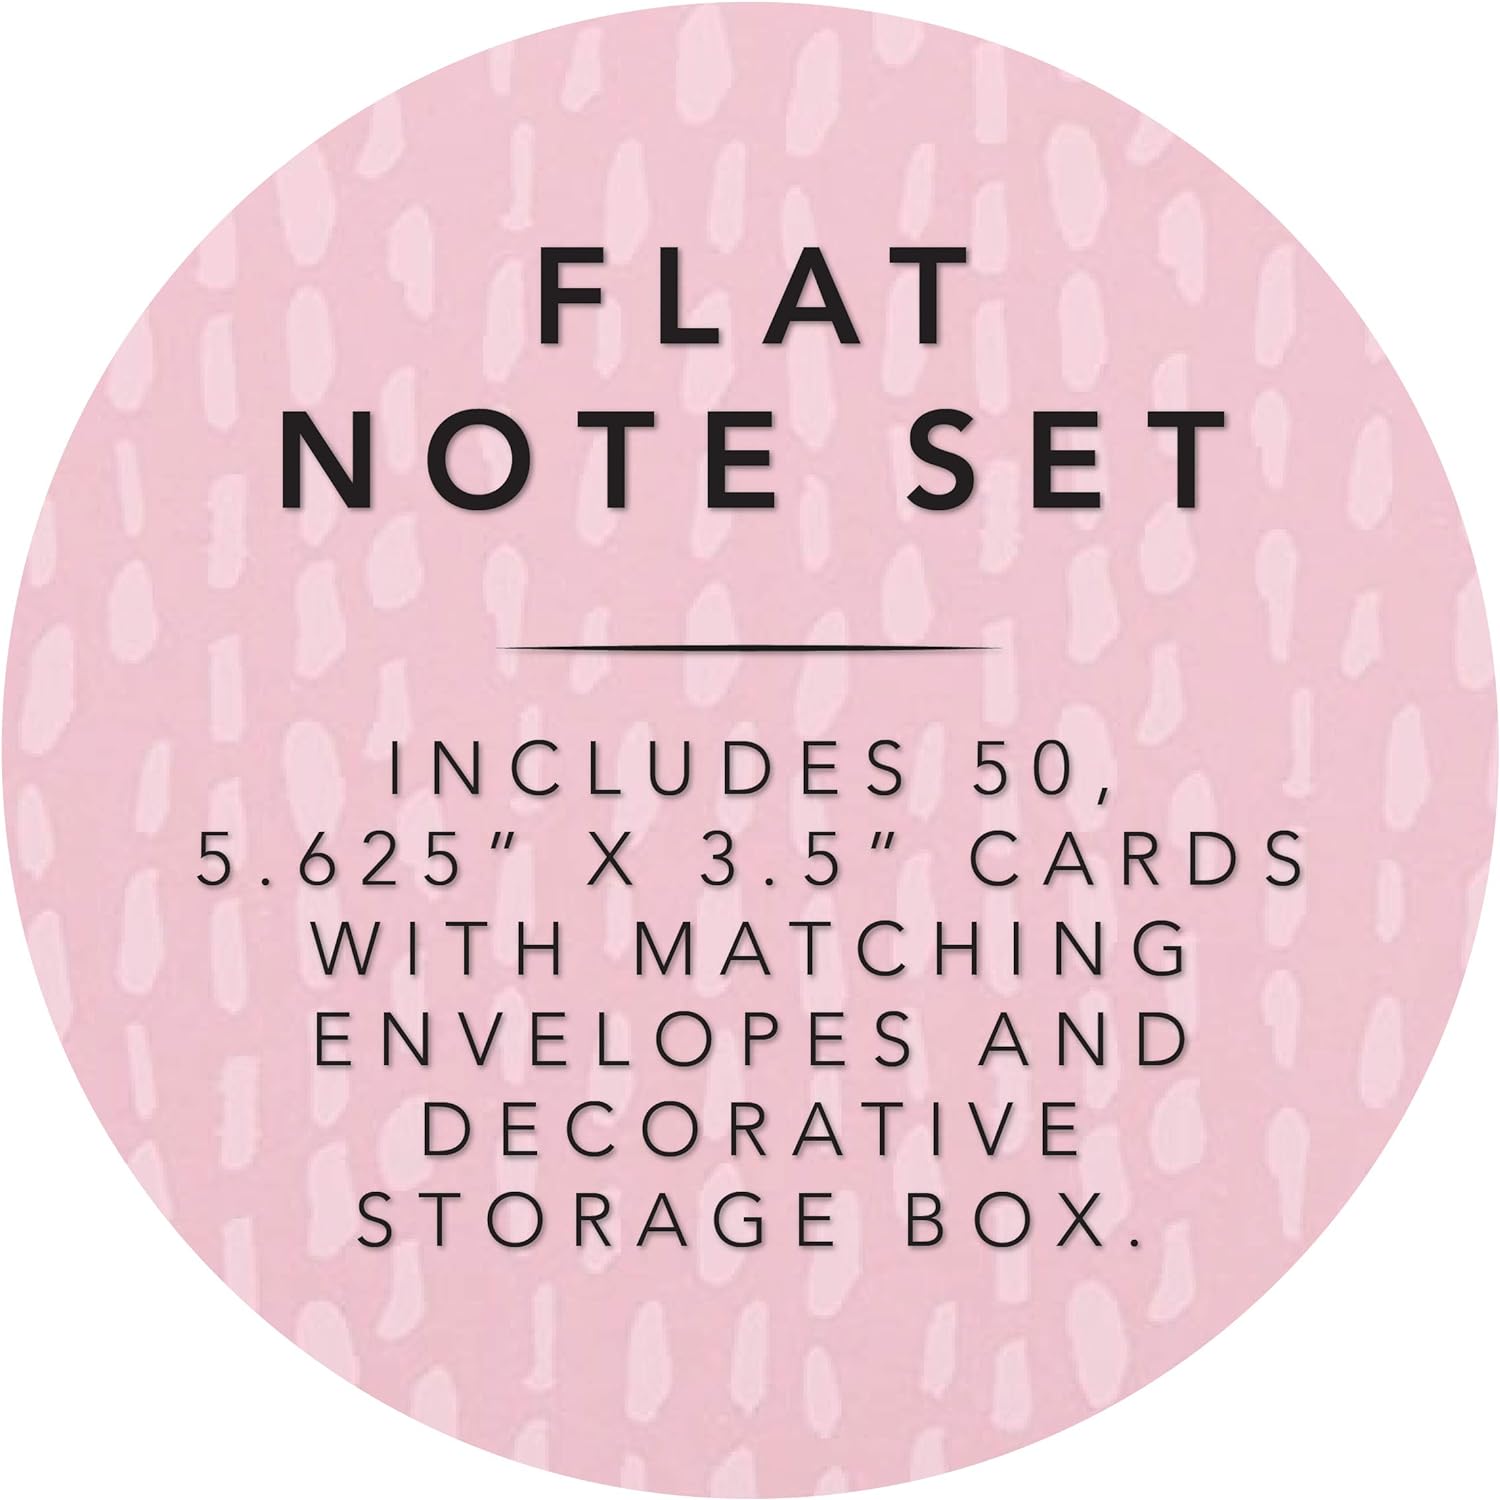 Graphique Watercolor Flowers Flat 50 Pcs Notes And Envelopes Colorful Floral Design Embellished With Gold Foil